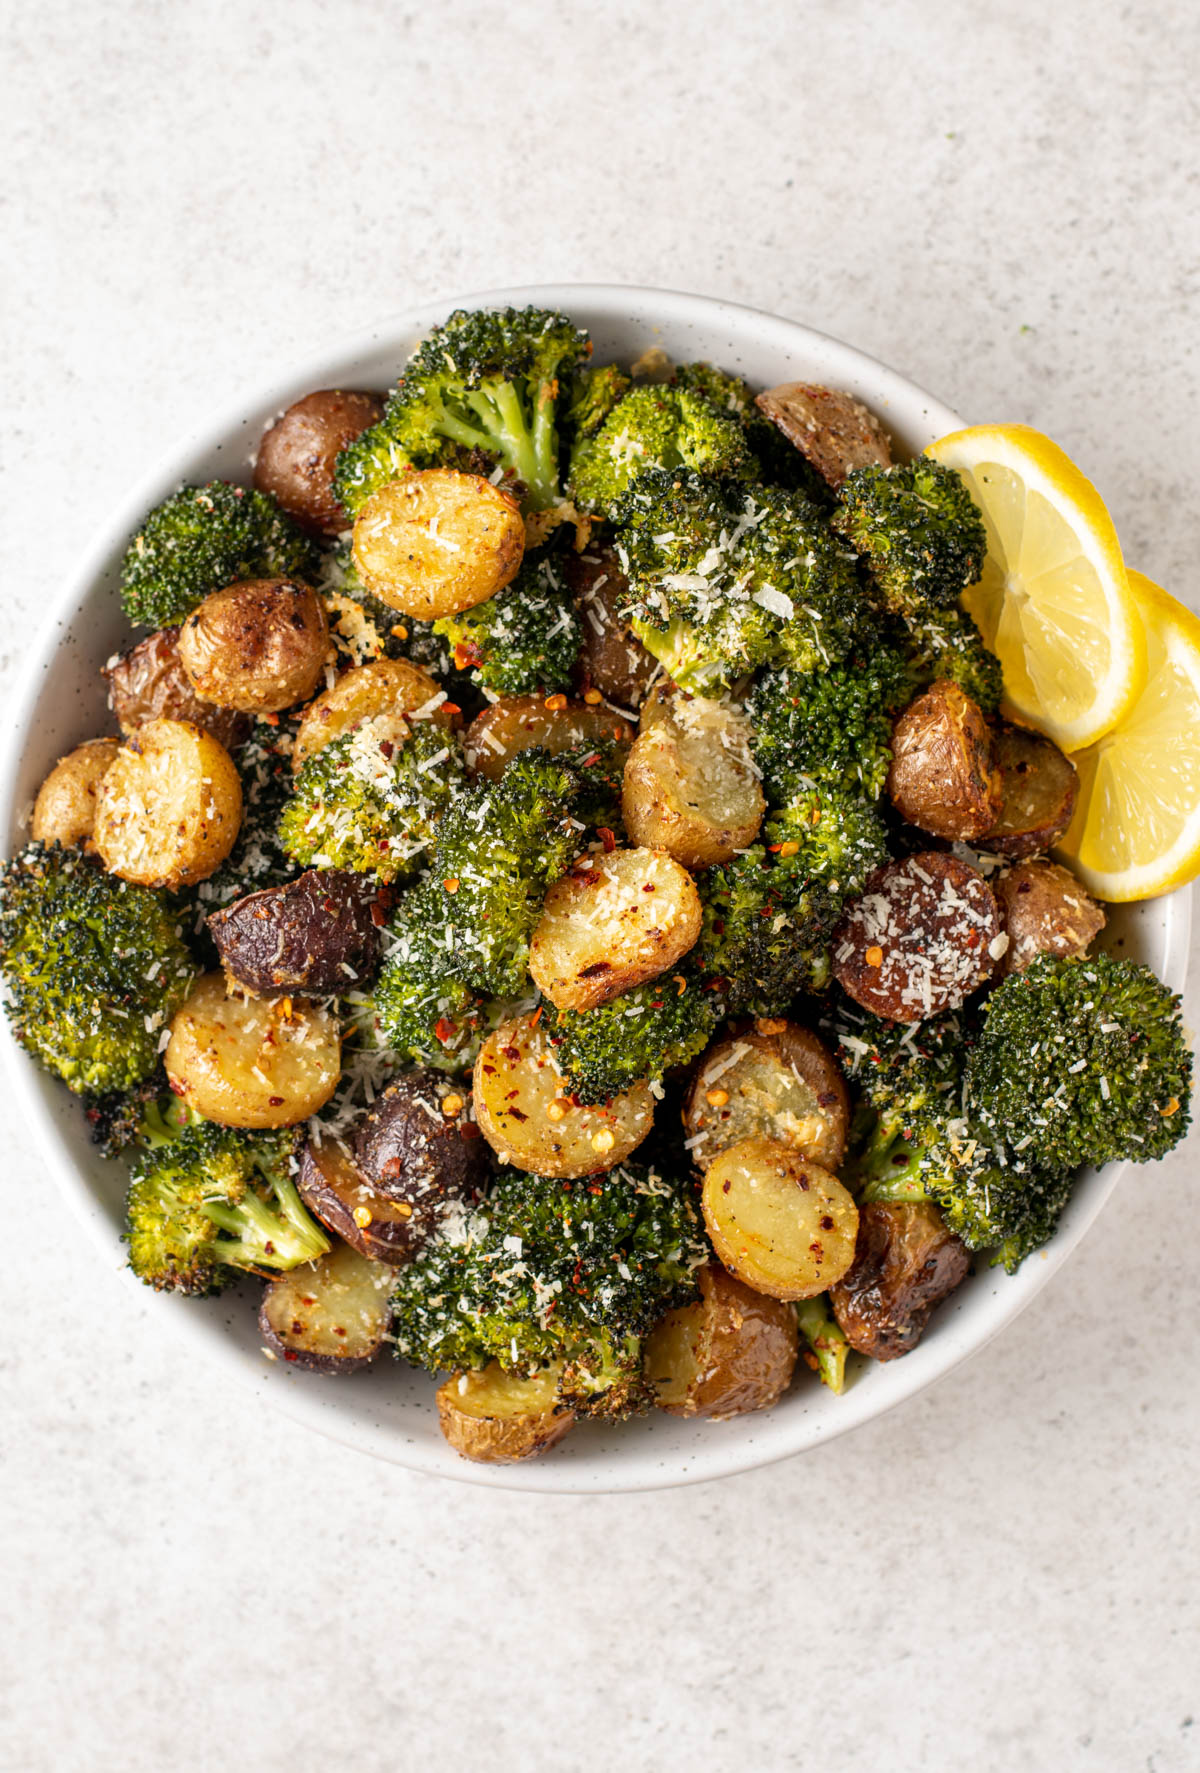 top view of roasted potatoes and broccoli in a bowl.